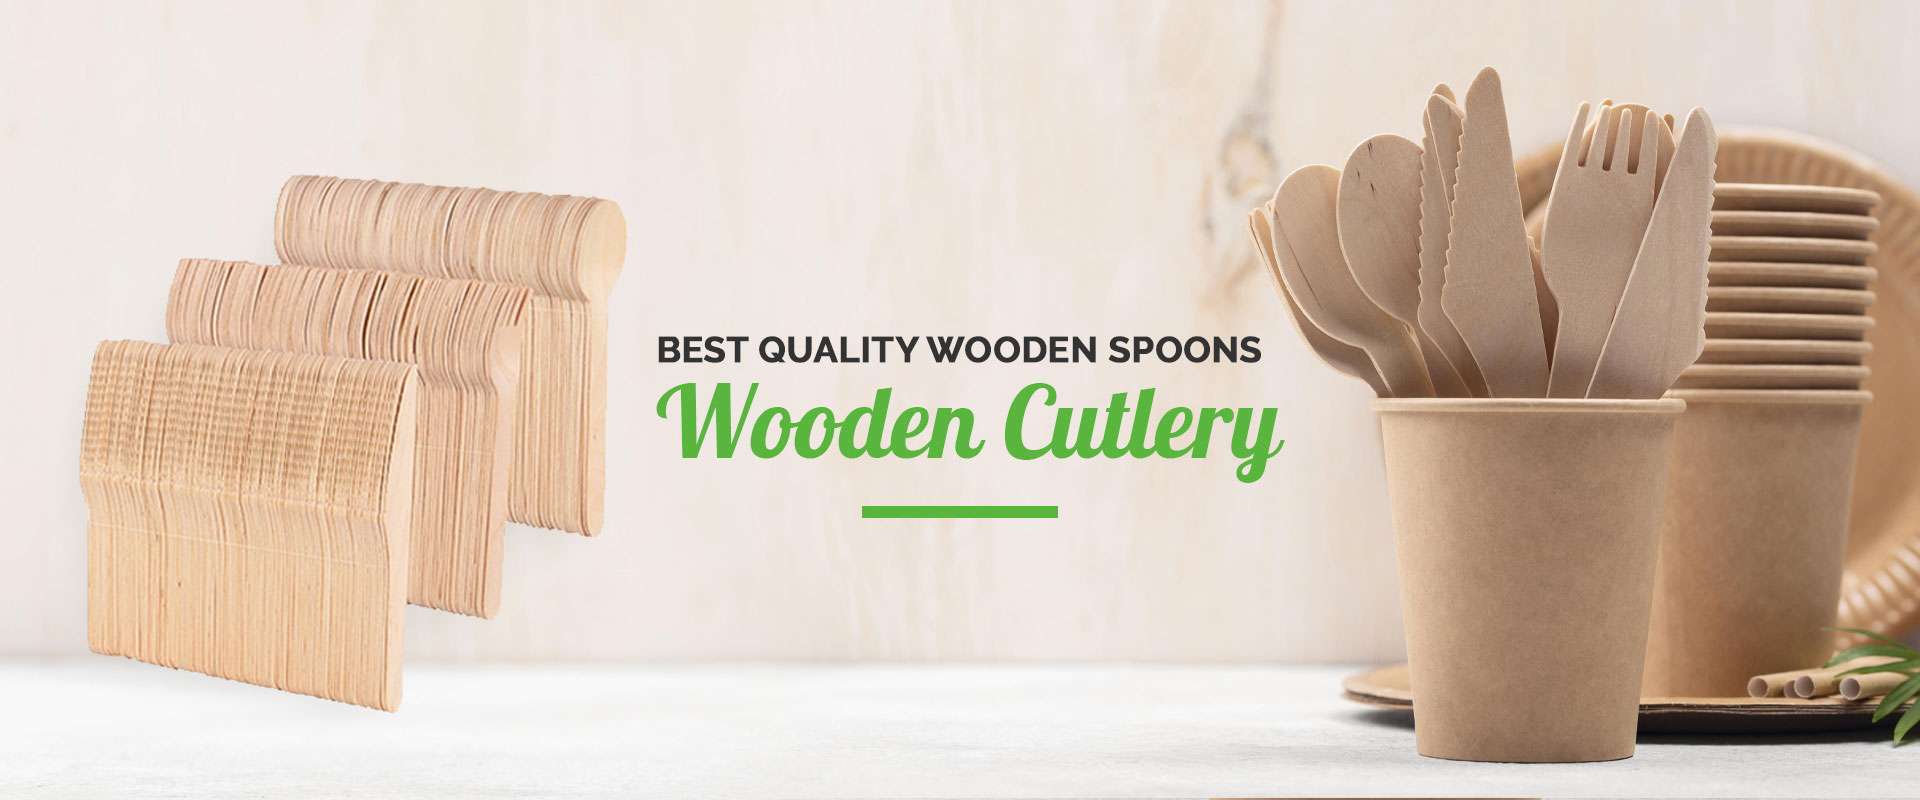  Wooden Cutlery Manufacturers in West Bengal